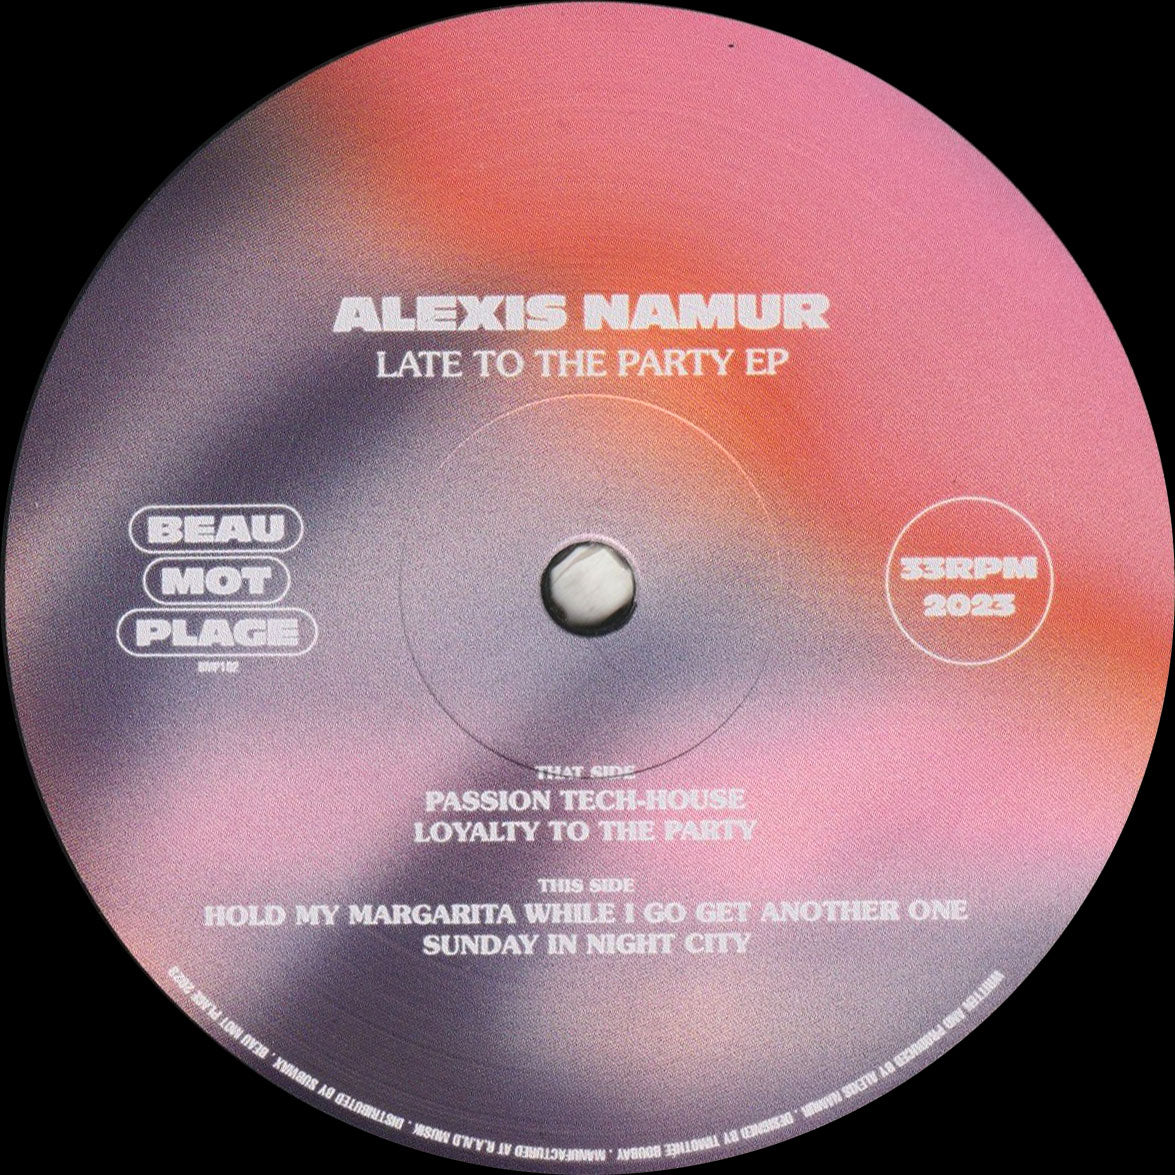 Alexis Namur - Late To The Party EP (Beau Mot Plage) (M)